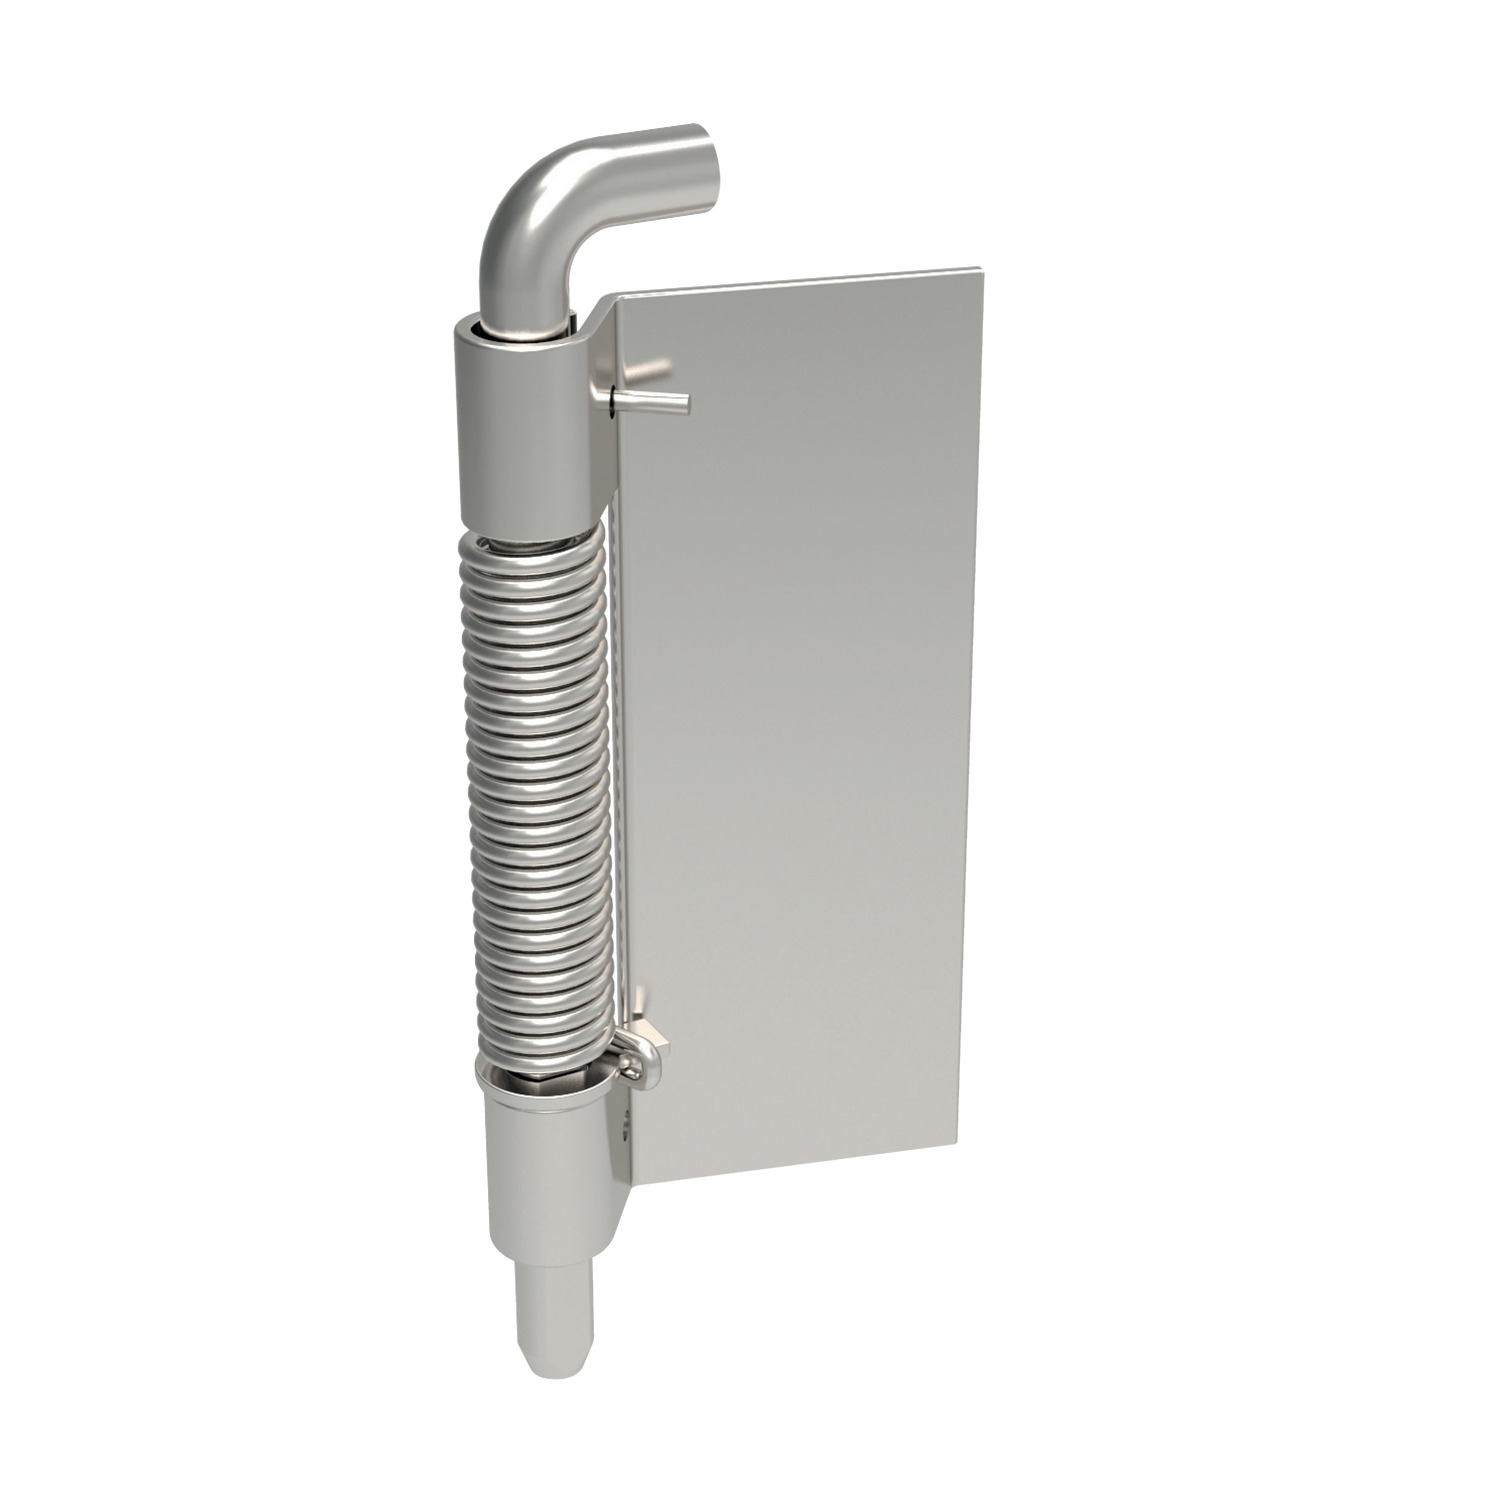 S2200.AC0010 End Mount Concealed Pivot Hinge Spring loaded - Weld-on - Stainless steel - Left. Also known as 53240.W0010